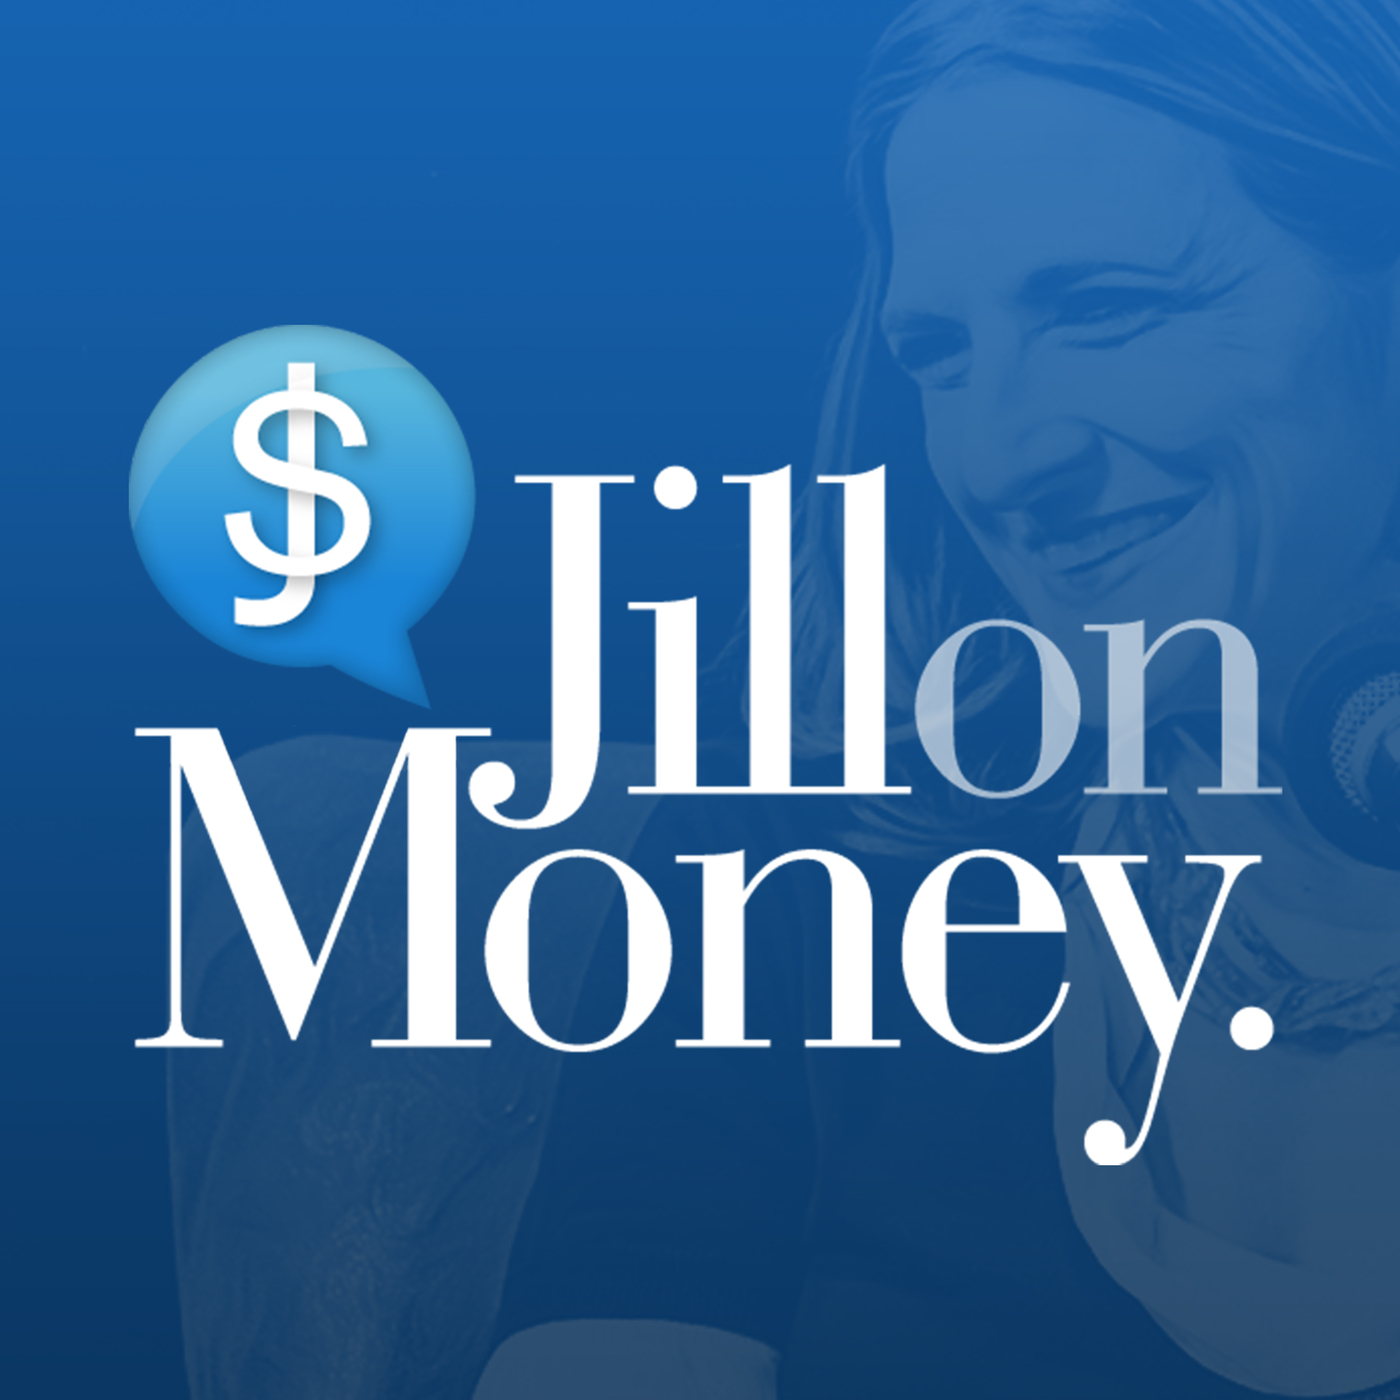 Joel’s Interview on the Jill on Money Podcast with Jill Schlesinger